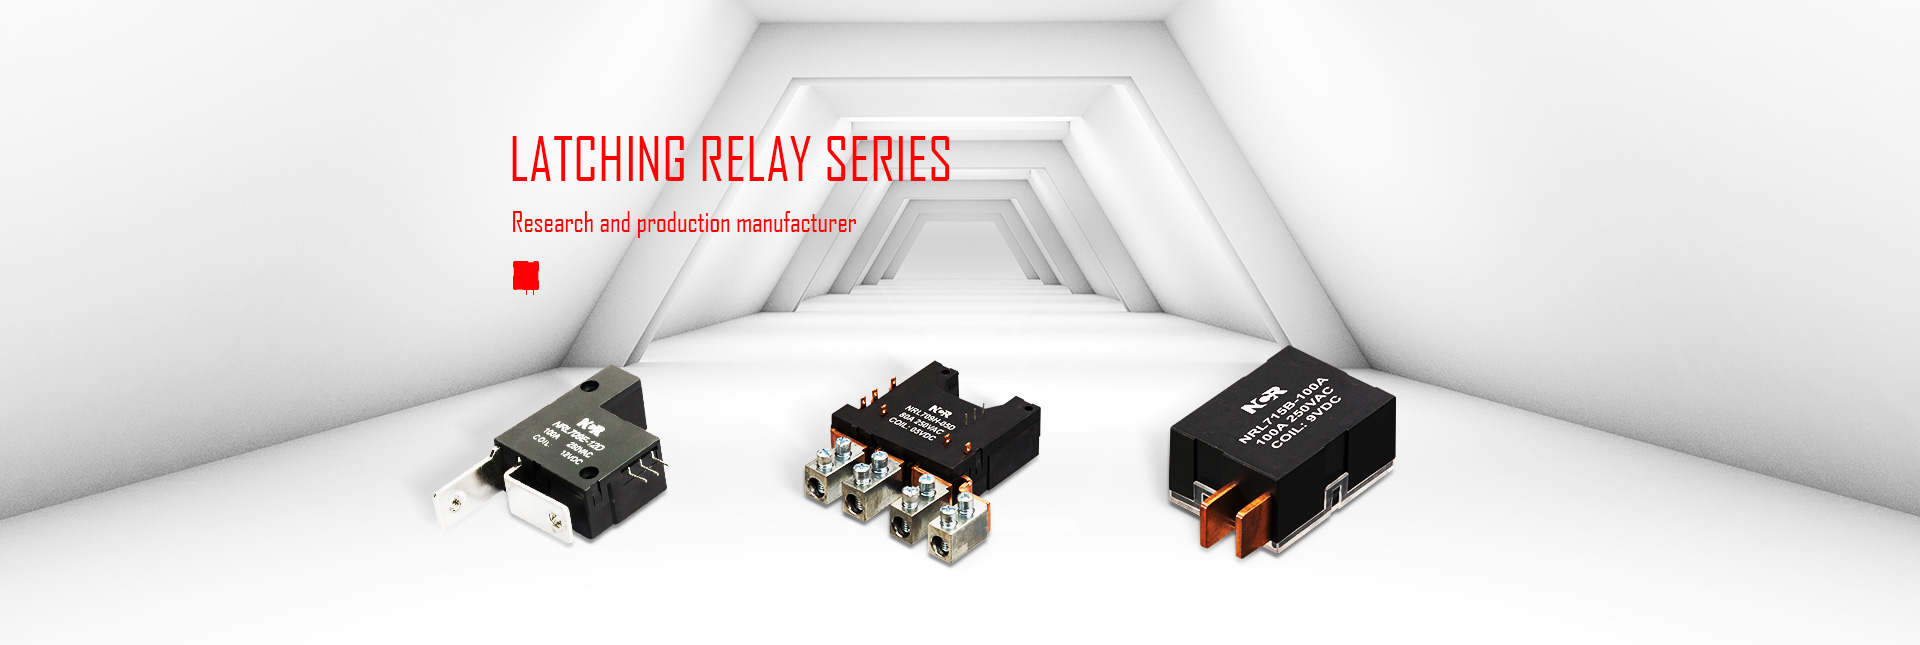 UC2 latching relay